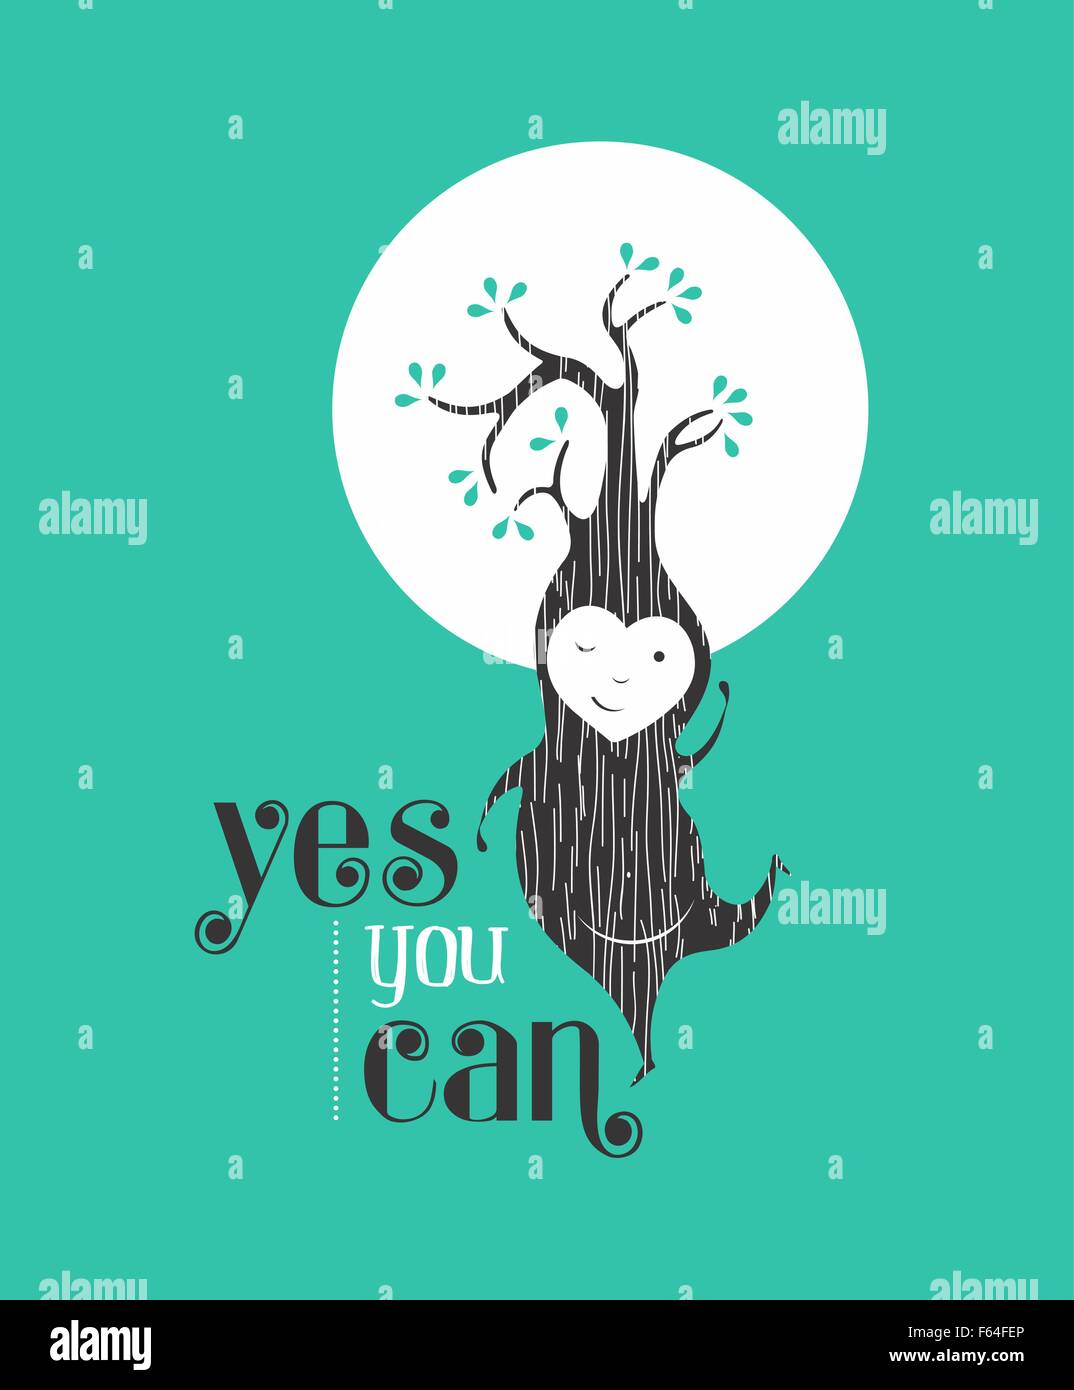 Yes you can motivation quote greeting card background with happy tree elf dancing. Ideal for friend or poster. EPS10 vector. Stock Vector